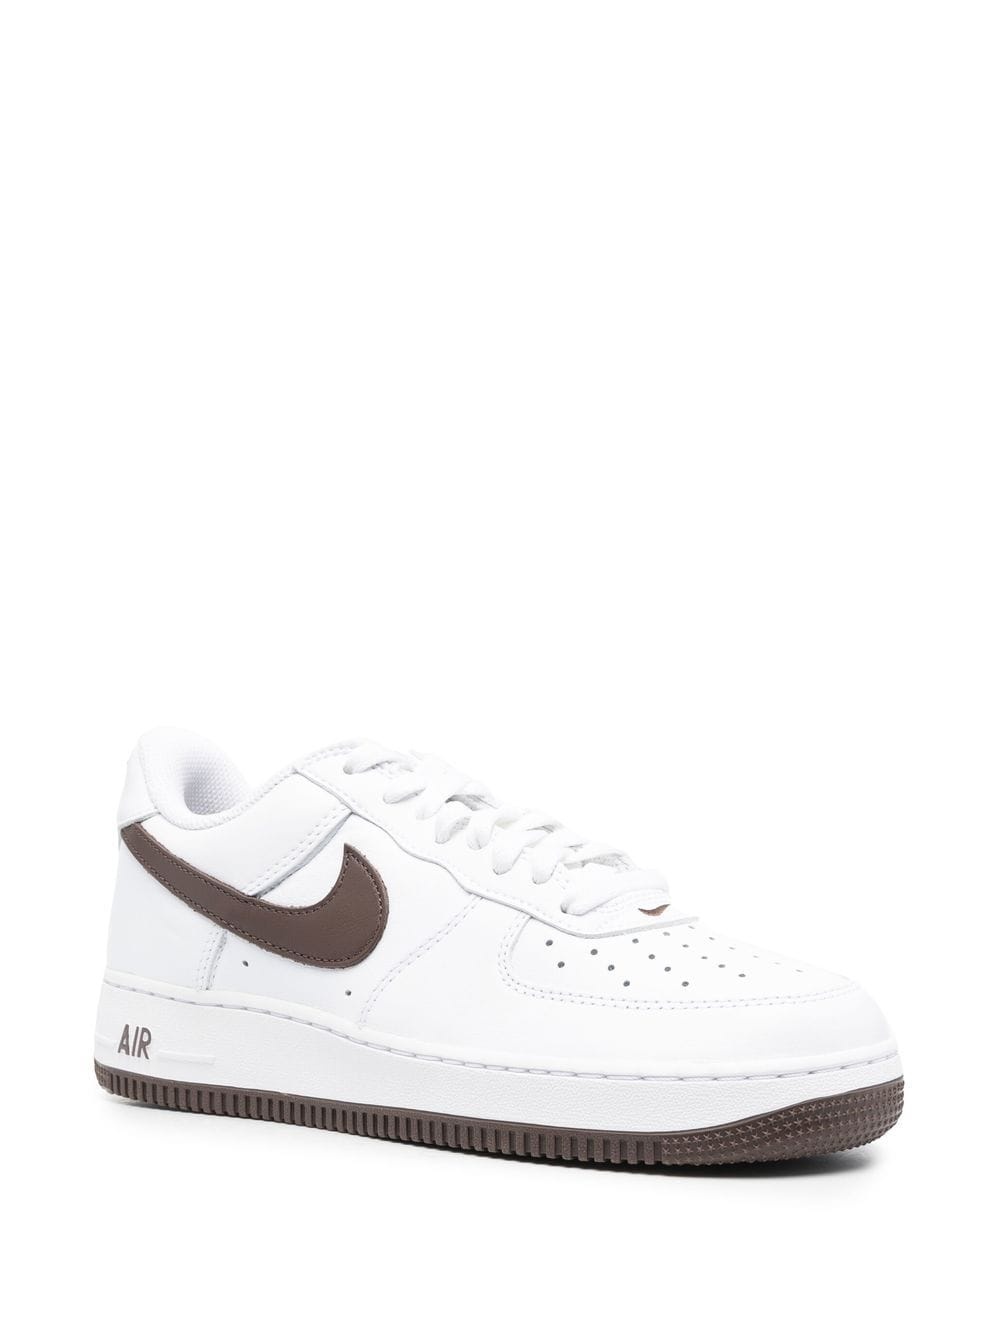 Air Force 1 "Chocolate" sneakers - 2